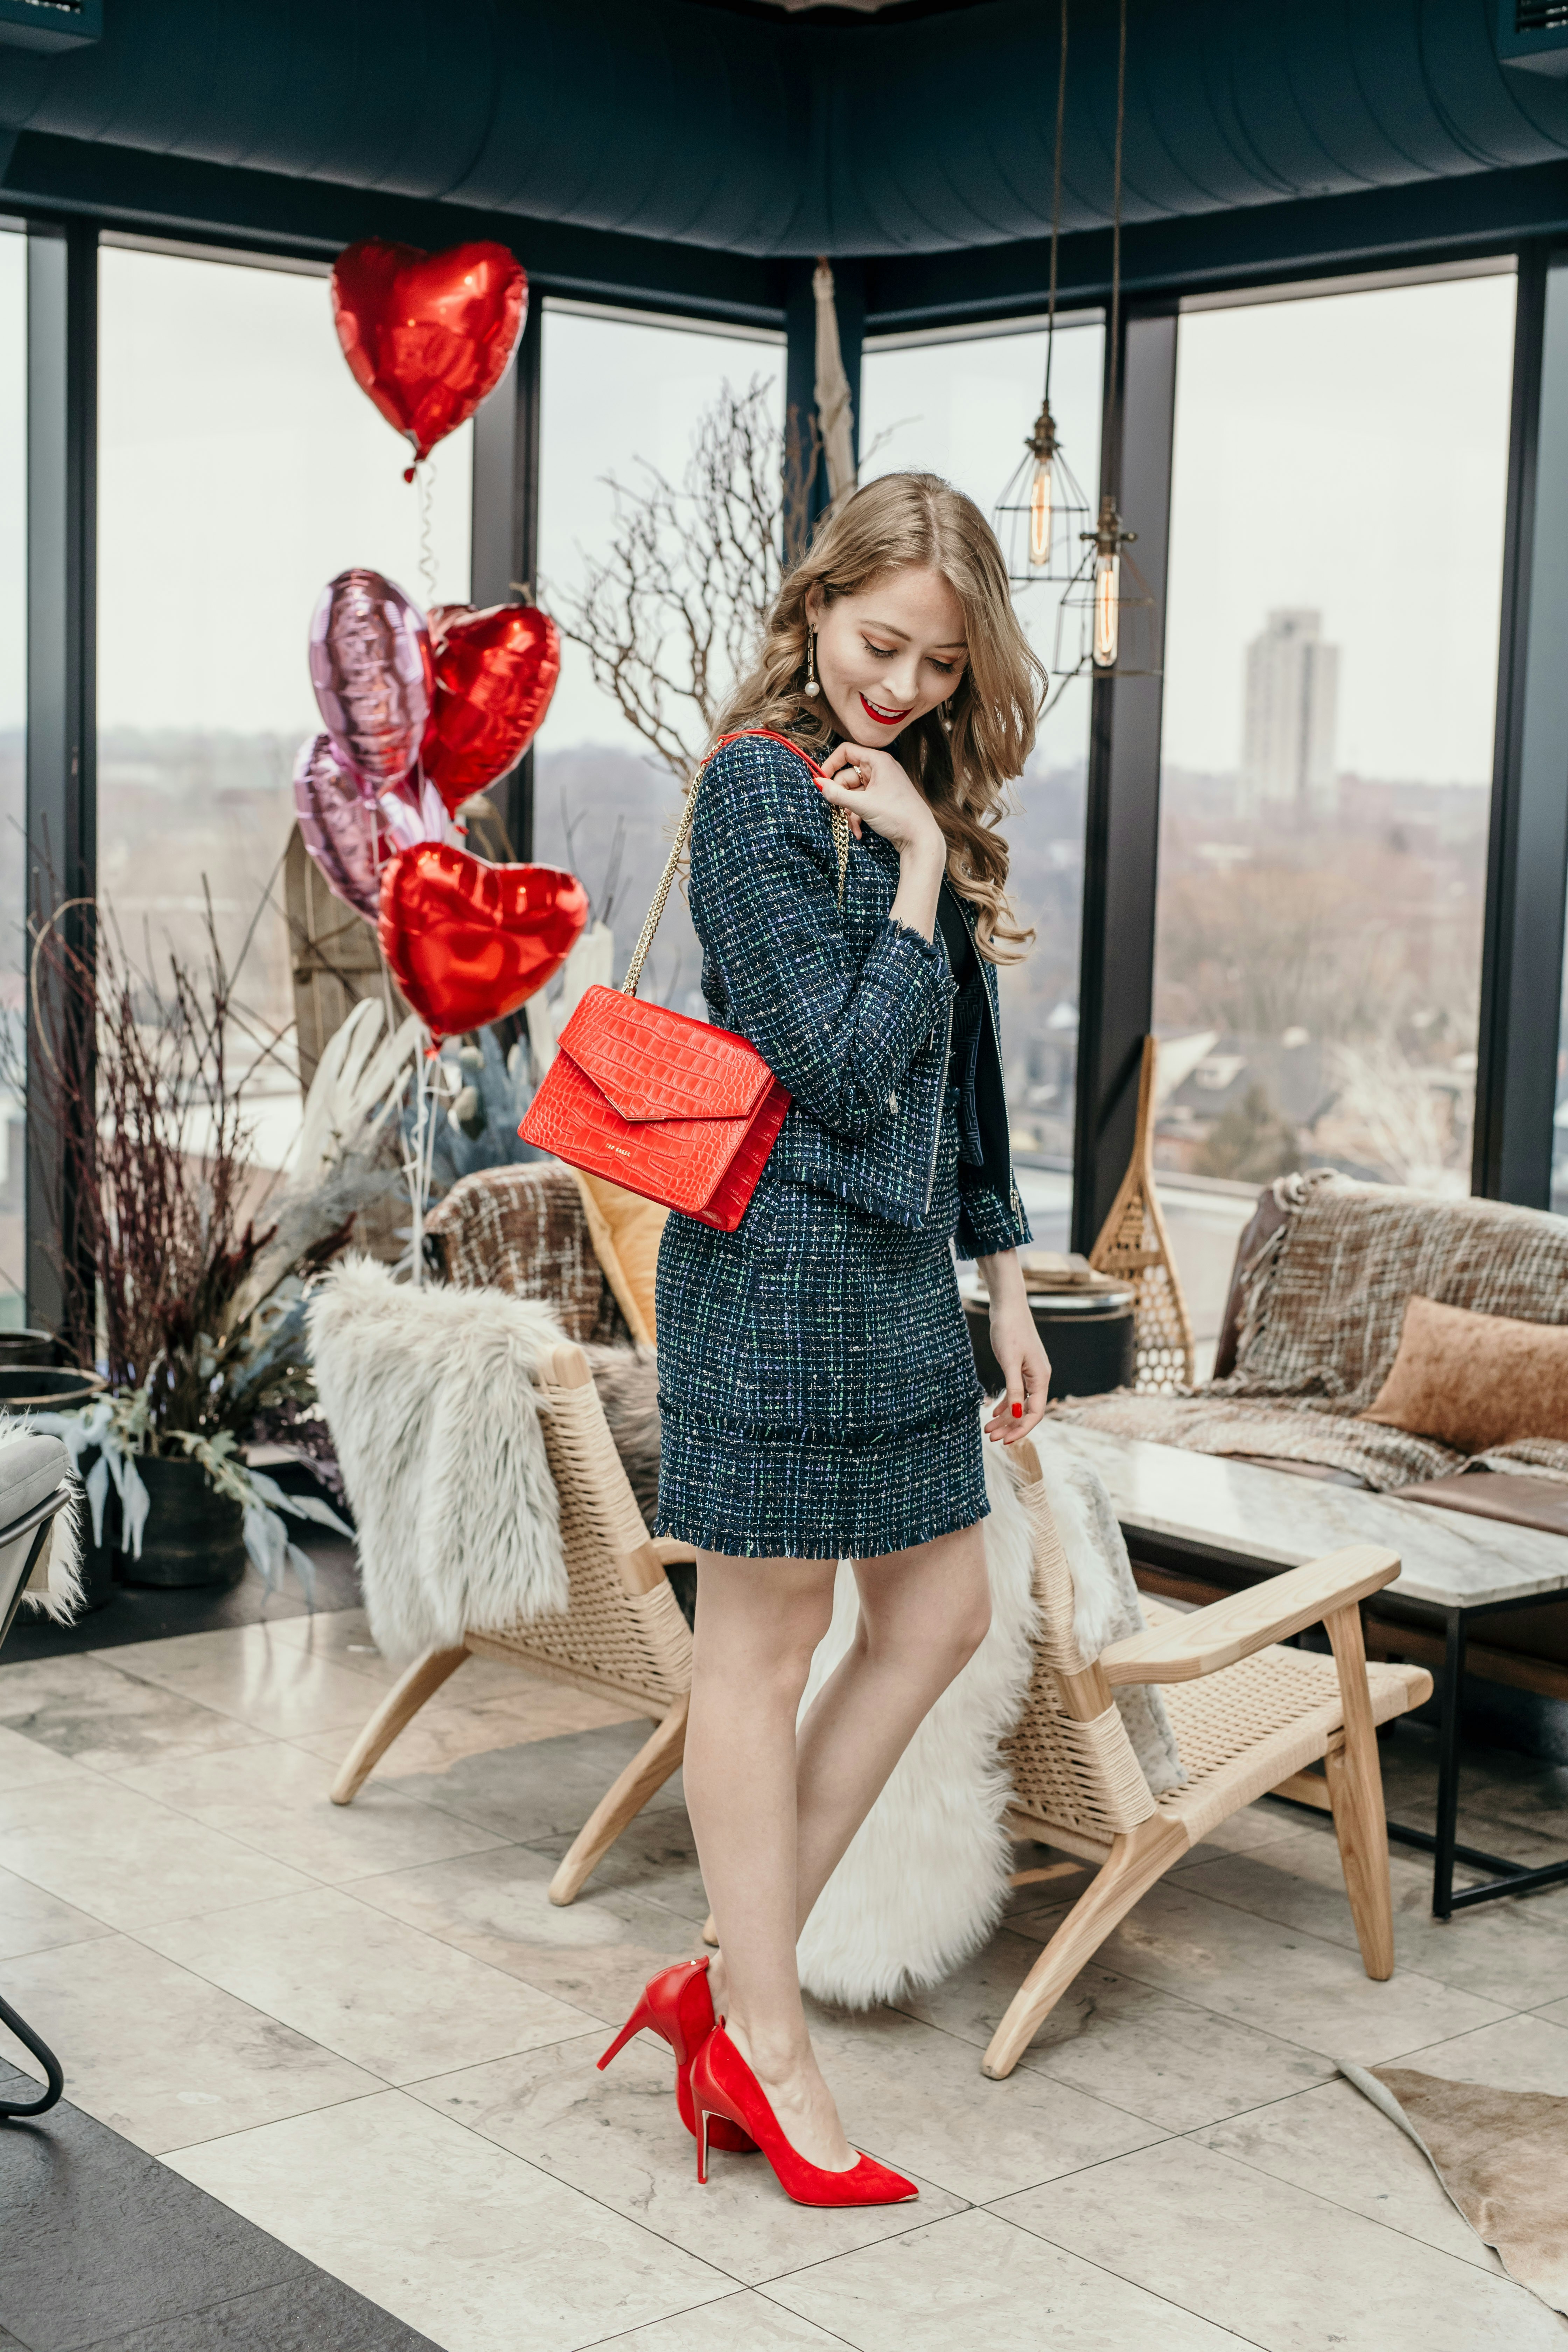 Ted Baker Boucle Jacket and Boucle Dress - Valentine's Day Outfit Idea that goes from office to date night.